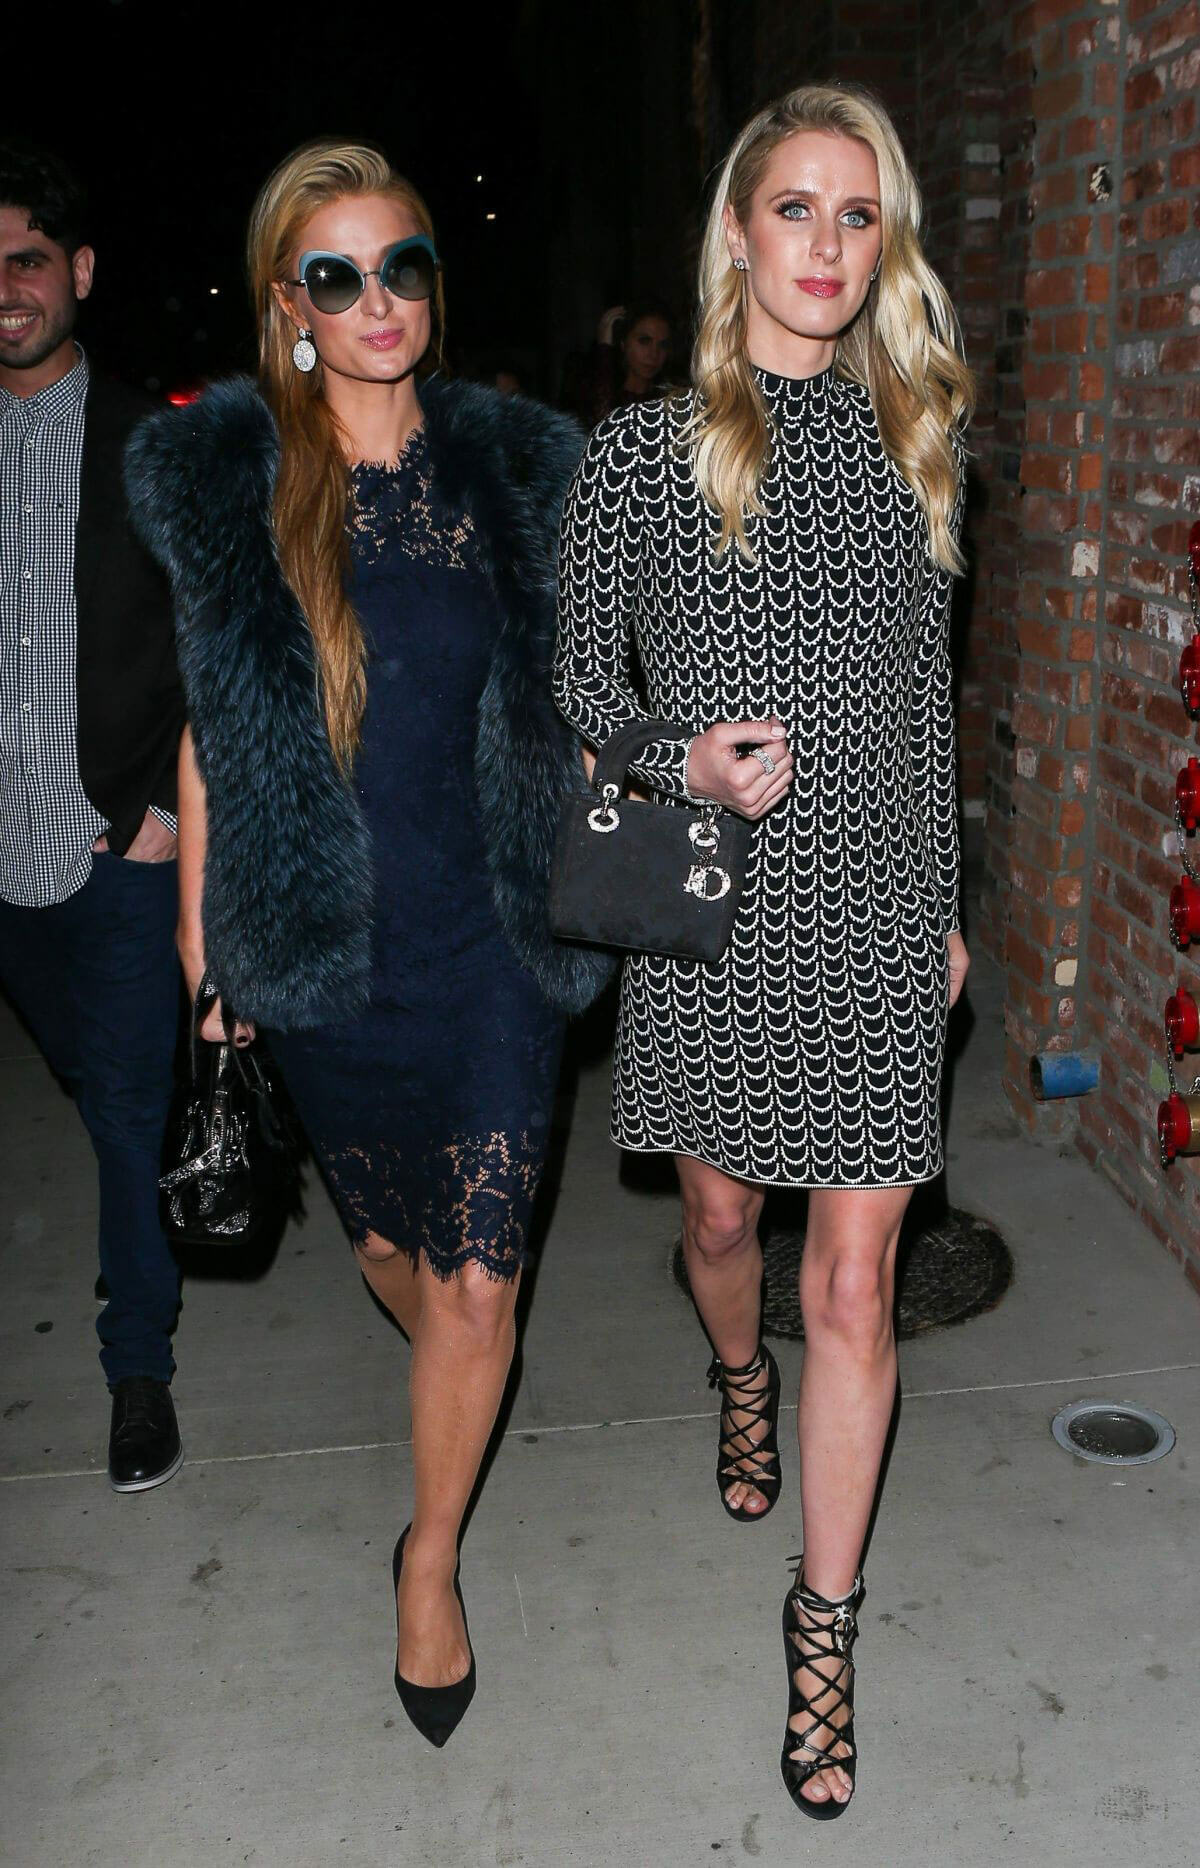 Paris Hilton and Nicky Hilton at Tao Beauty & Essex in Hollywood